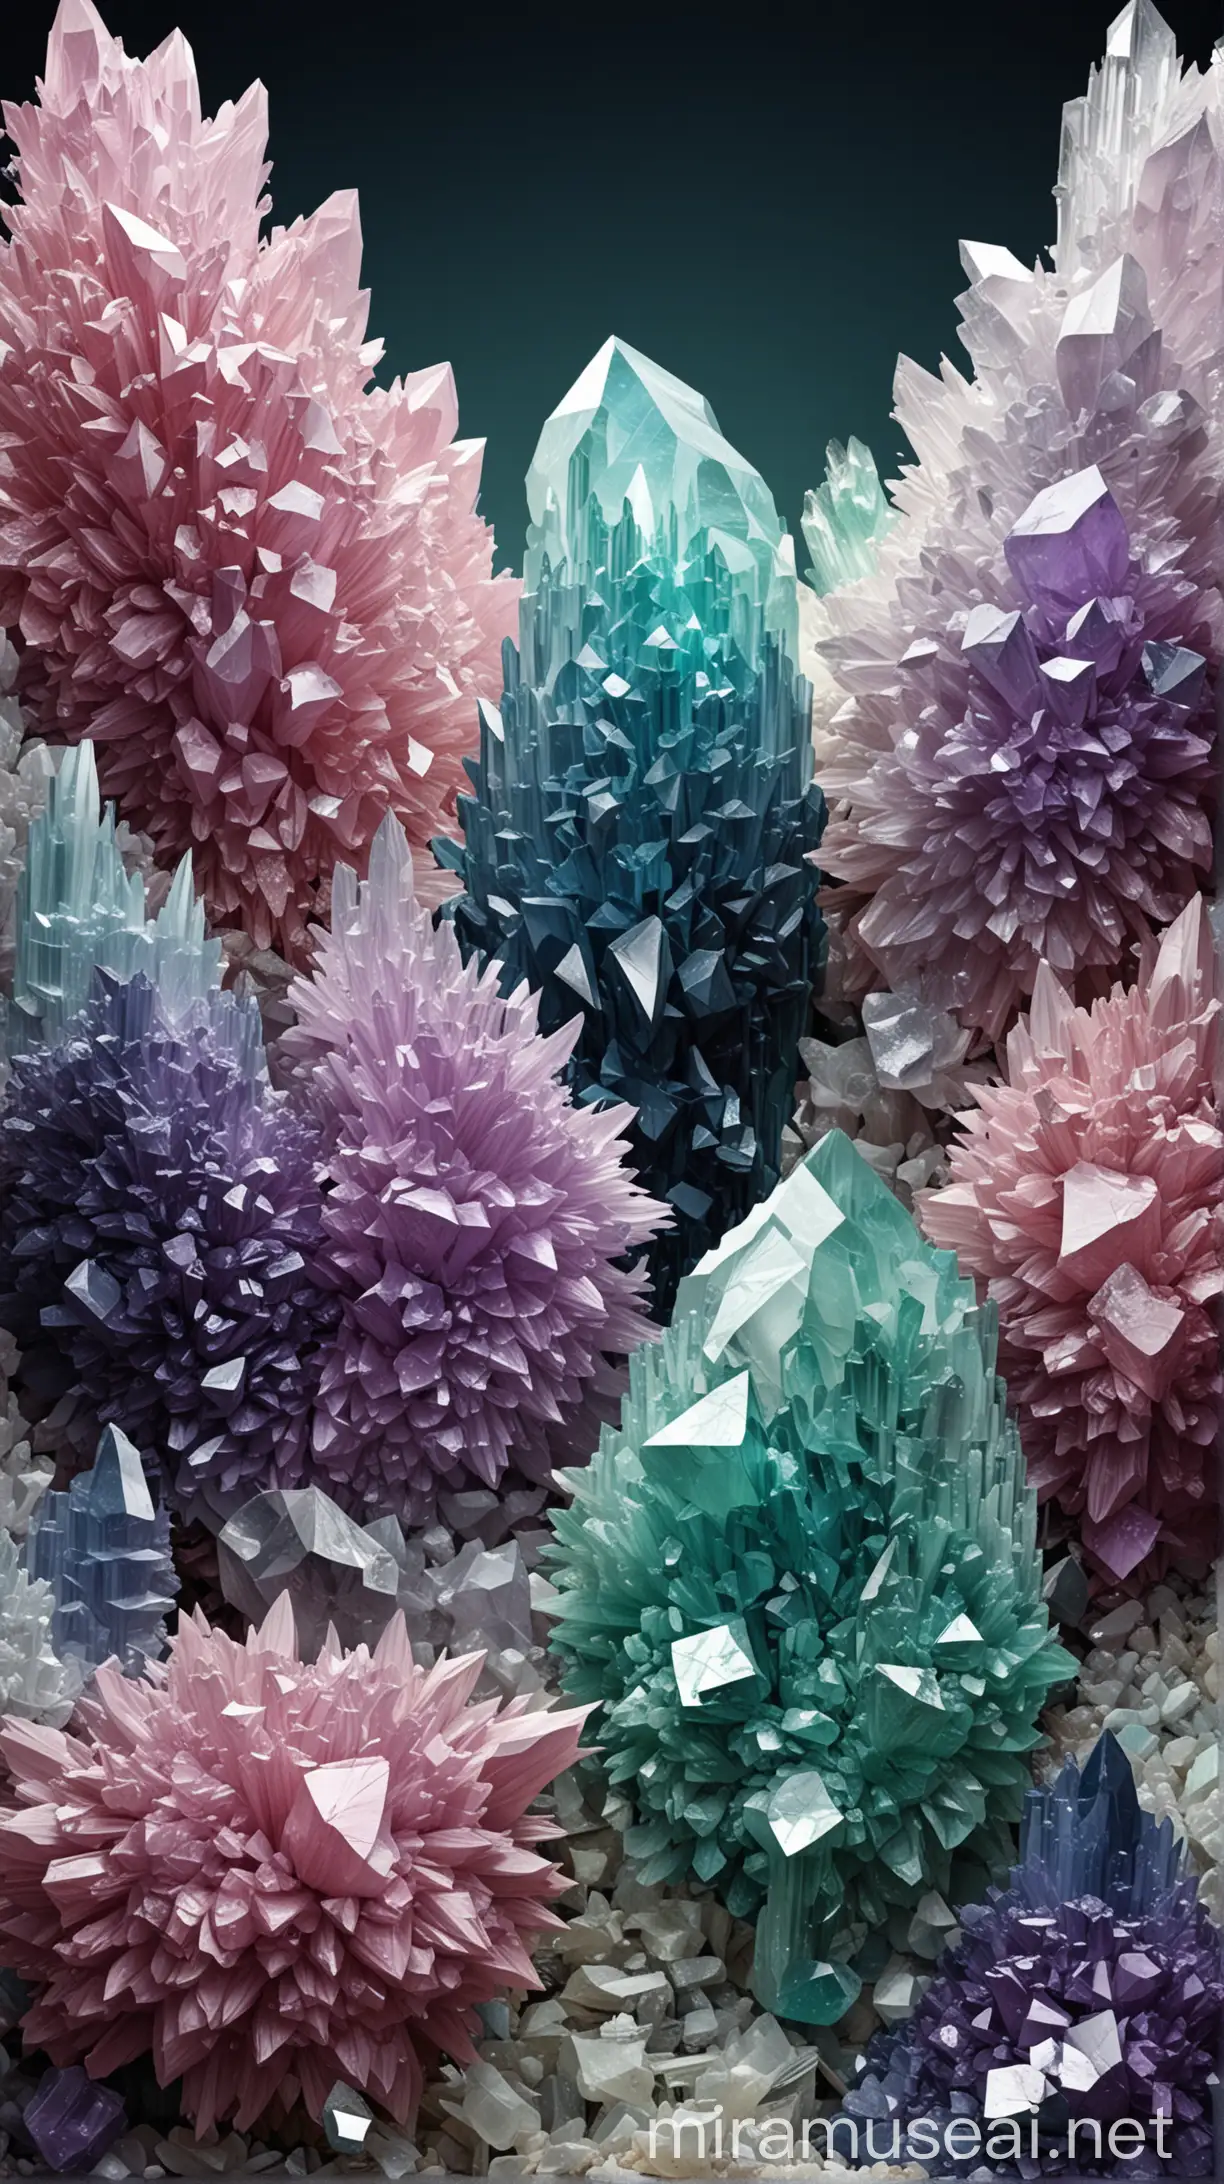 Colorful Crystals and Ores Beautiful Popular Science Magazine Cover